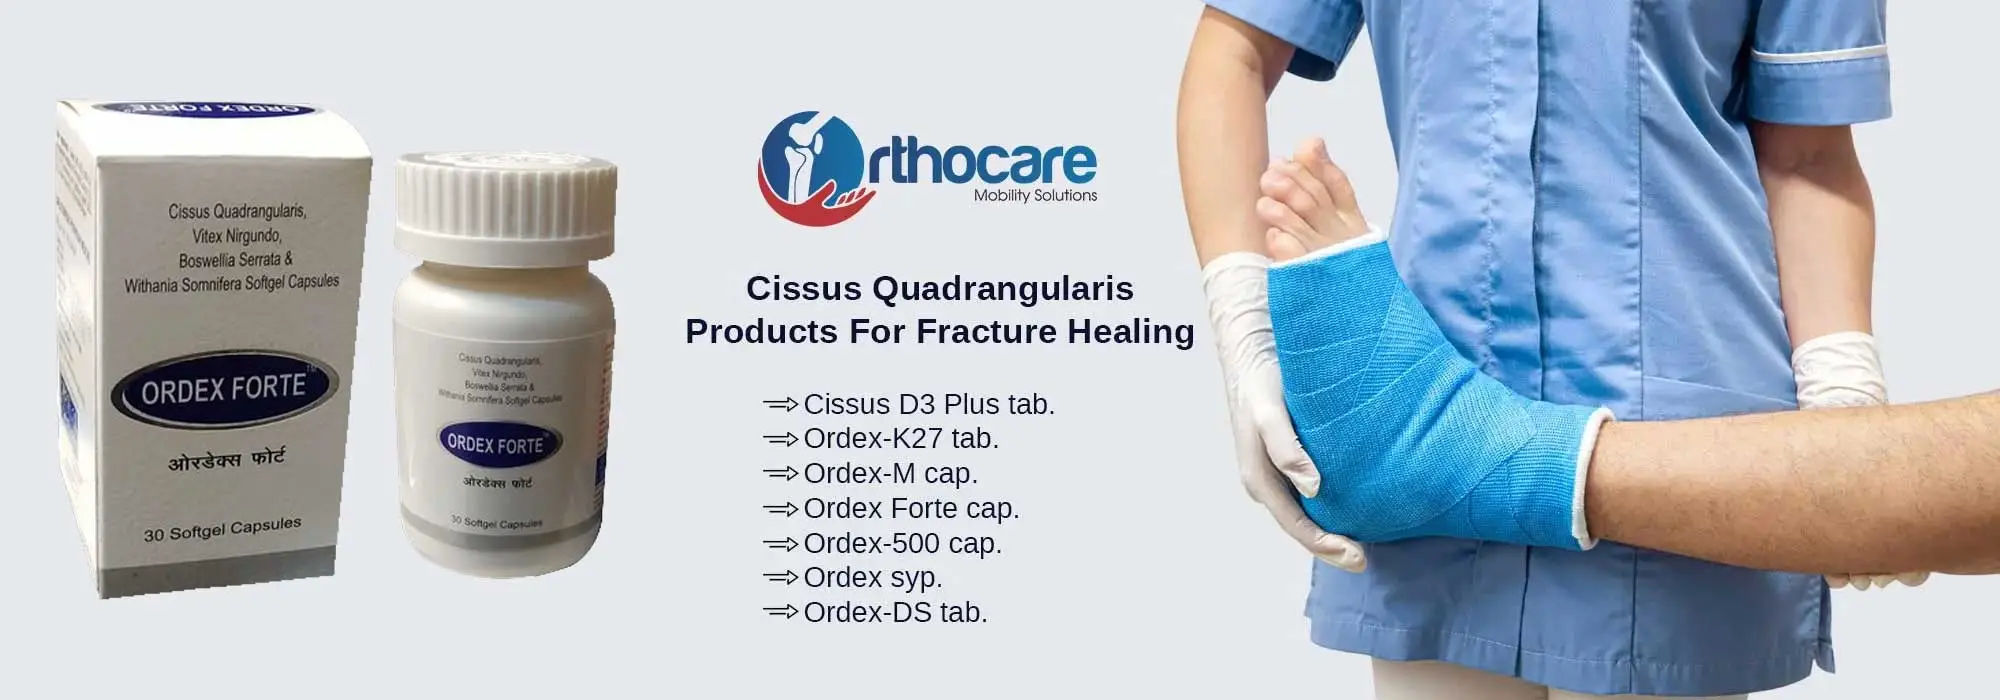 Cissus Quadrangularis Products For Fracture Healing Suppliers in Pulwama